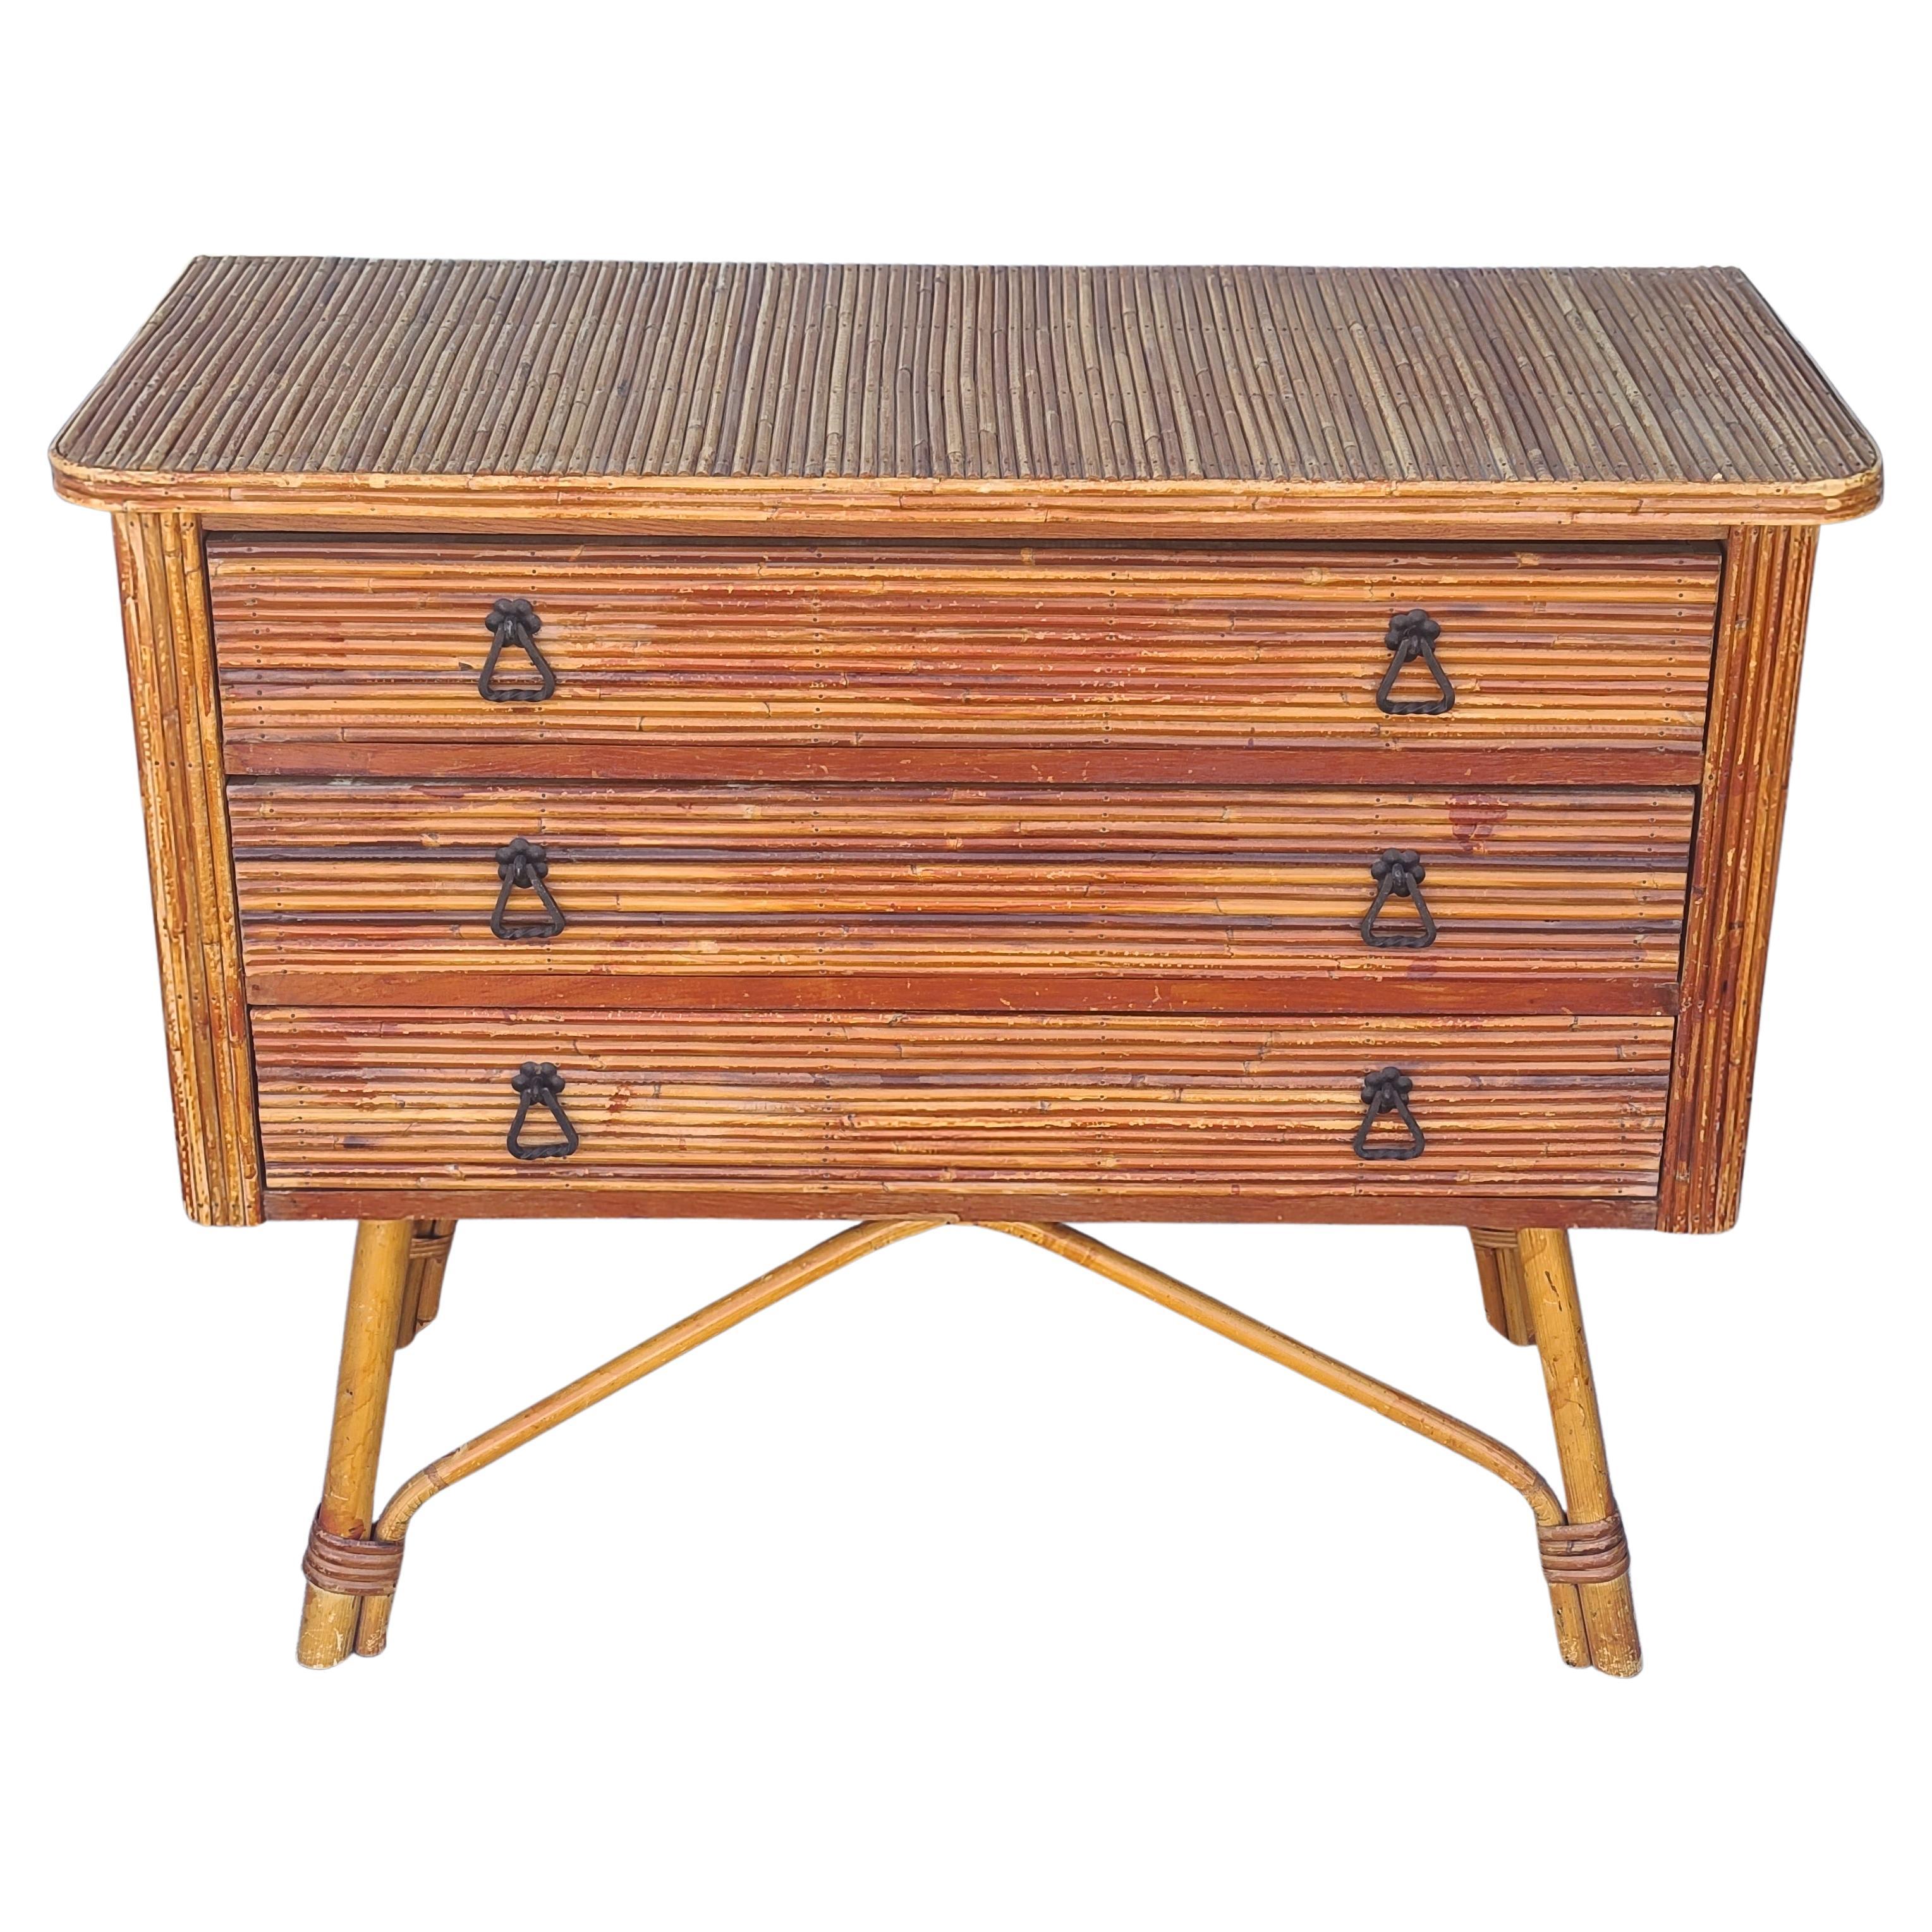 Pencil Reed French Dresser Attributed to Adrien Audoux & Frida Minet